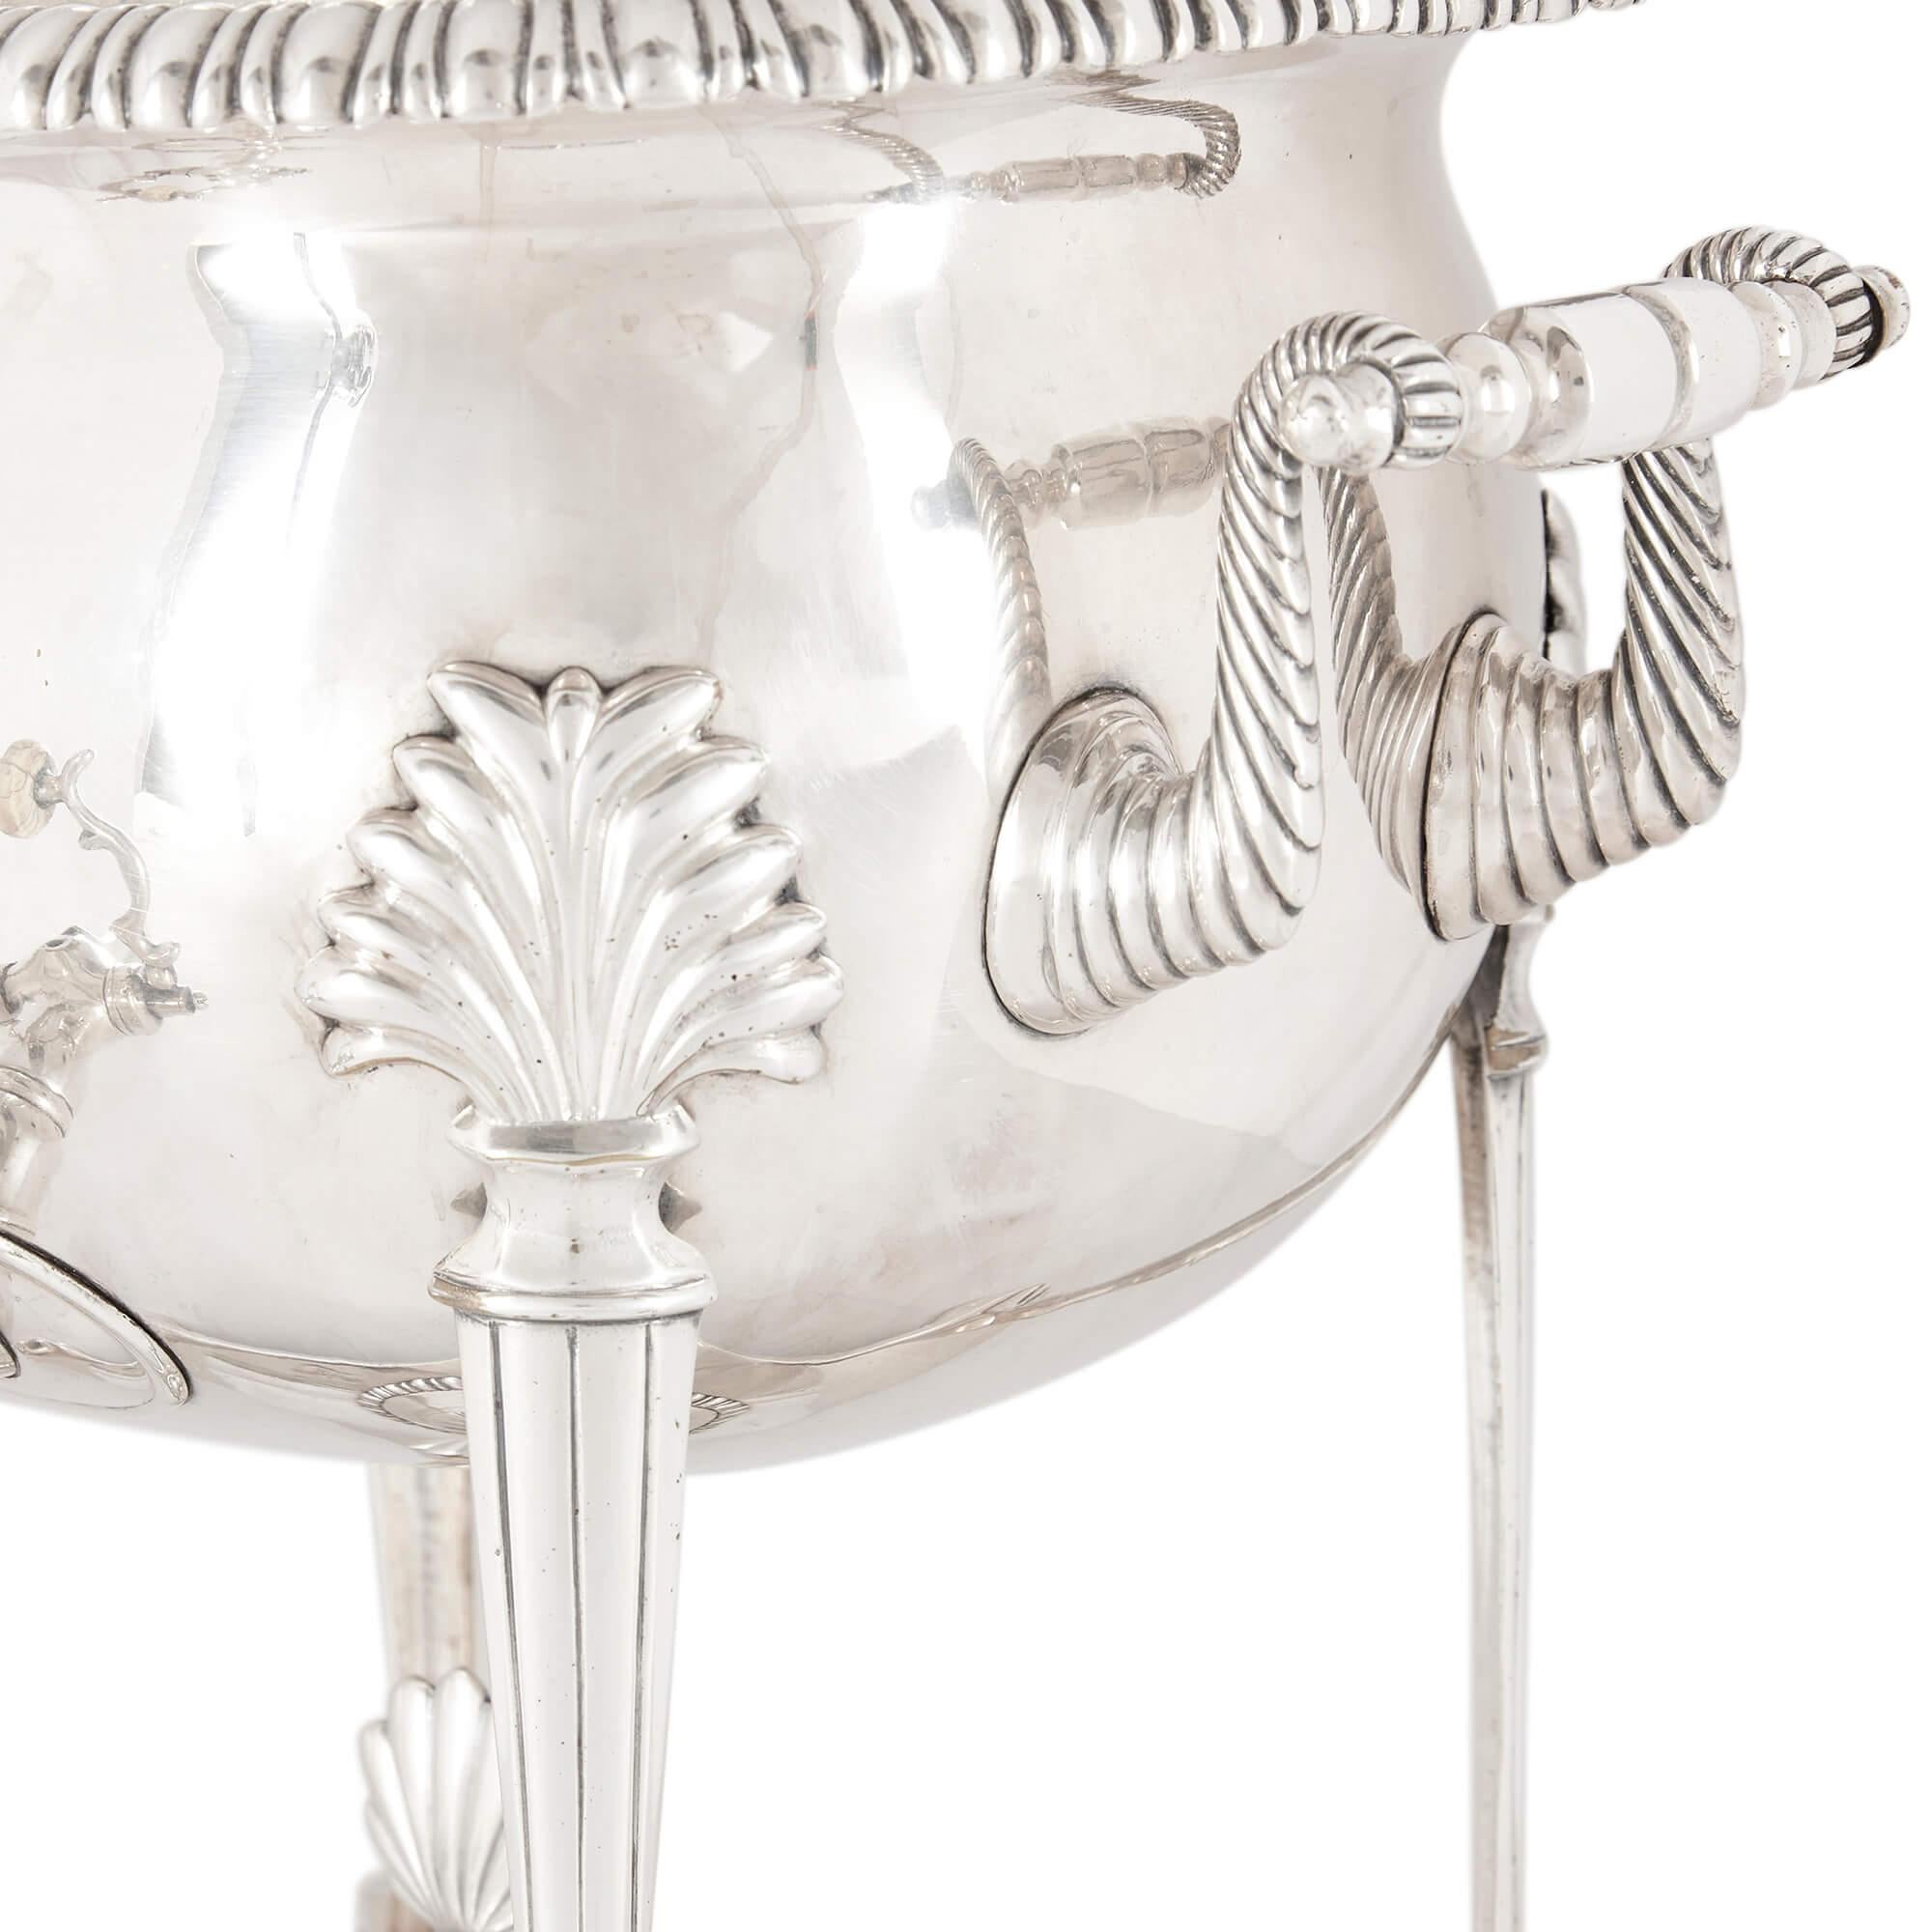 Twin-Handled Antique English Silver Plated Samovar, London, Late 19th Century For Sale 1